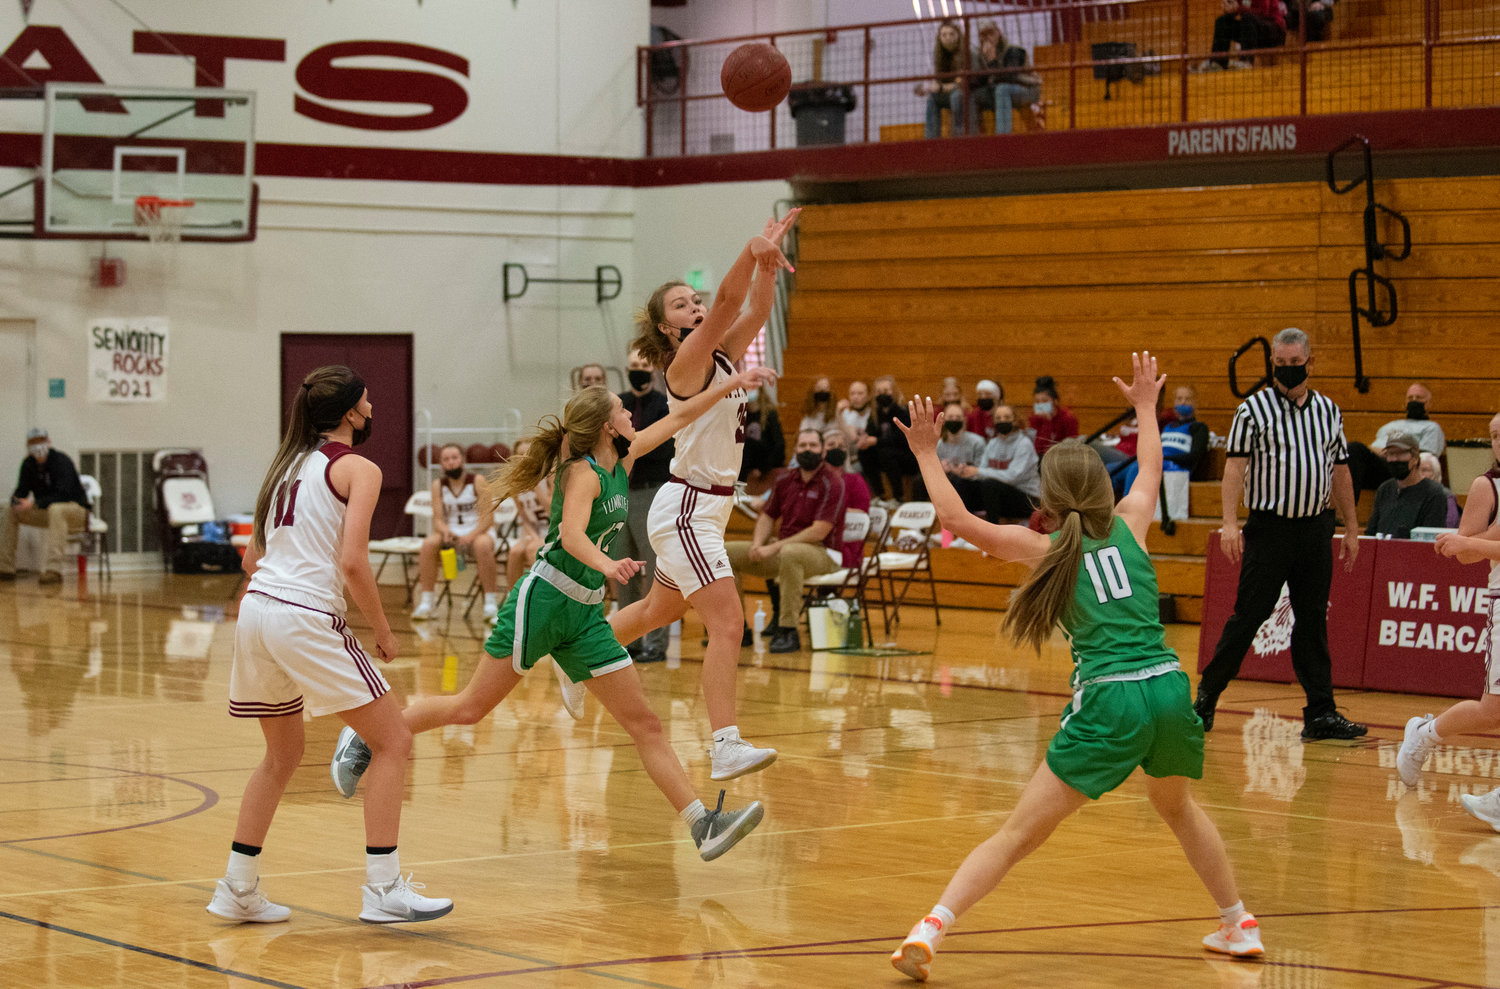 W.F. West's Kyla McCallum heaves a shot at the halftime buzzer against Tumwater on Monday.